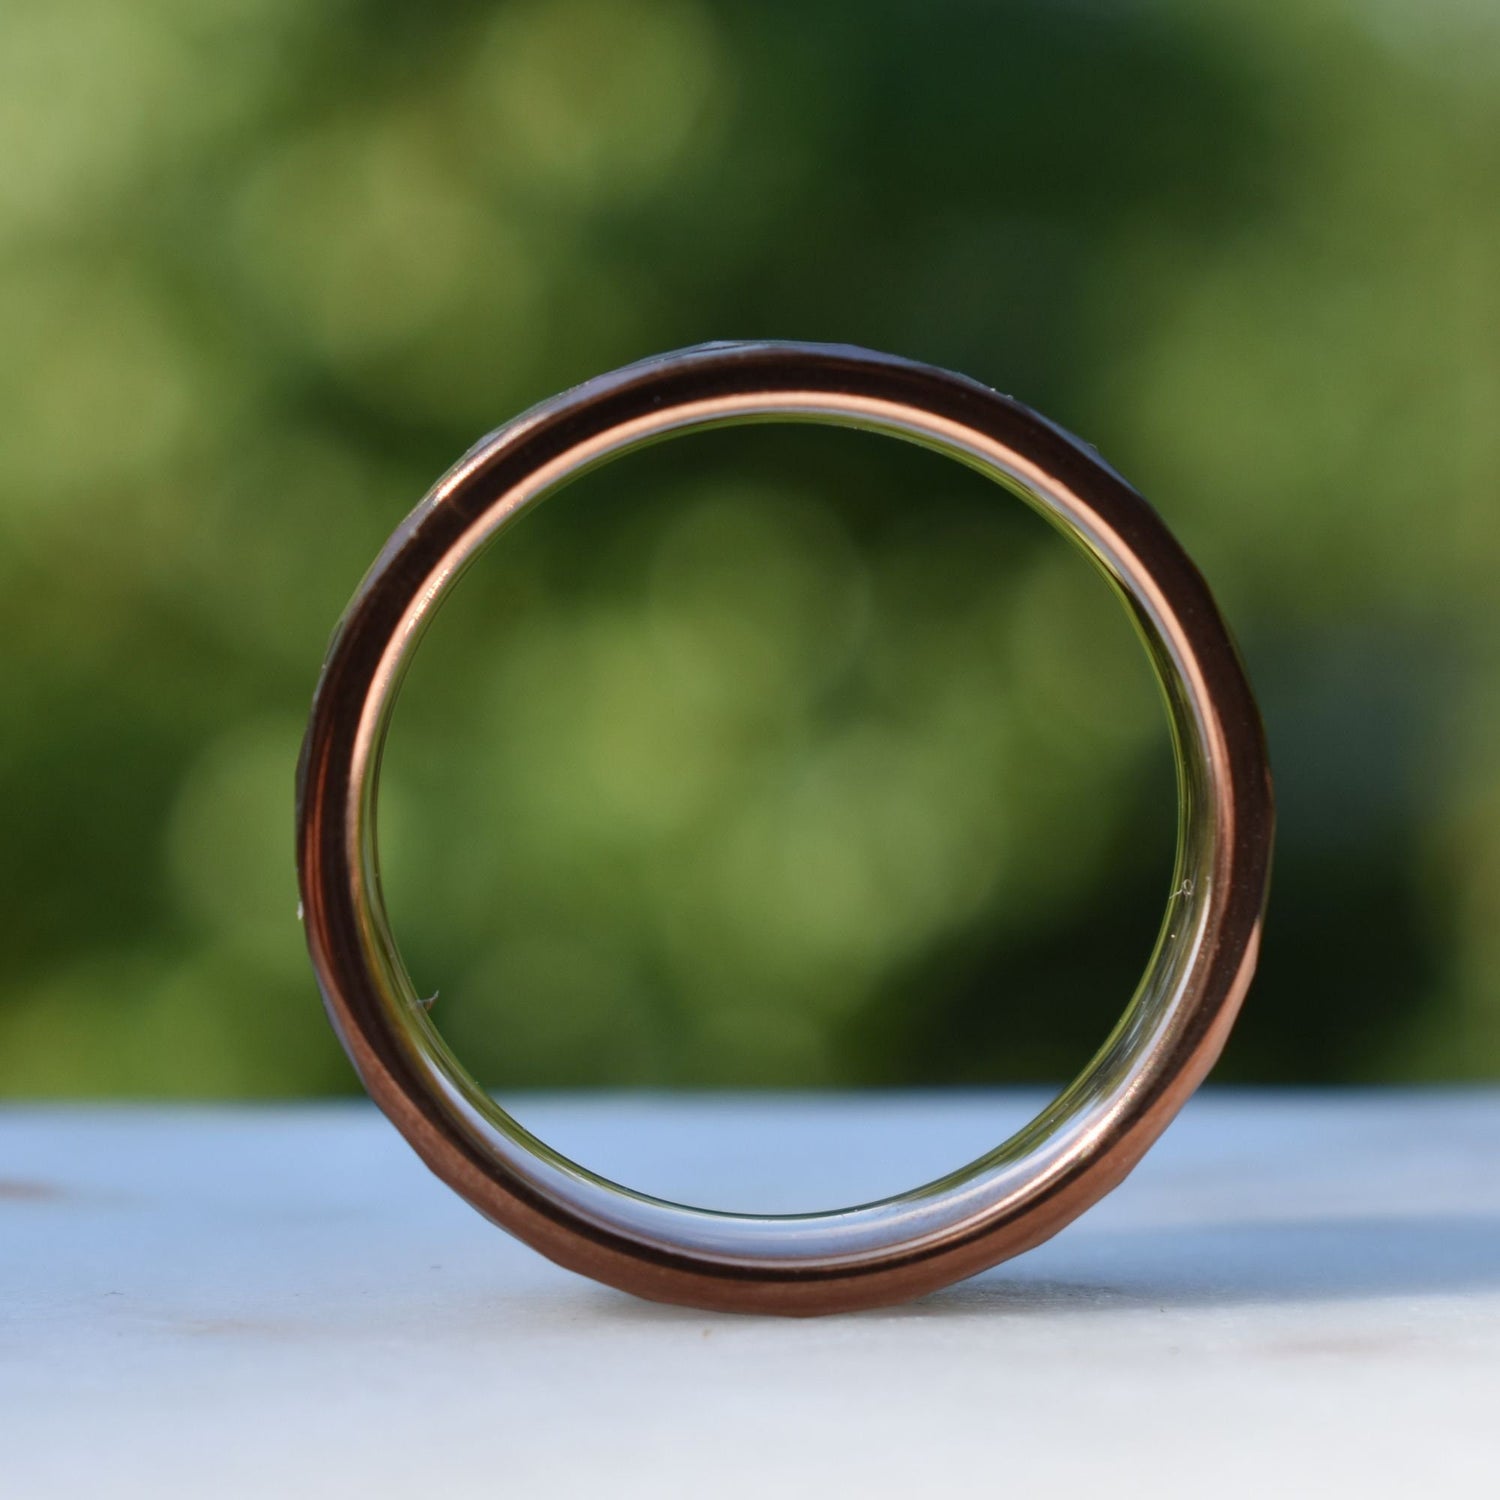 Hammered 8mm Chocolate Tungsten Ring with Rose Gold Accent, Mens Ring, Mens Wedding Band